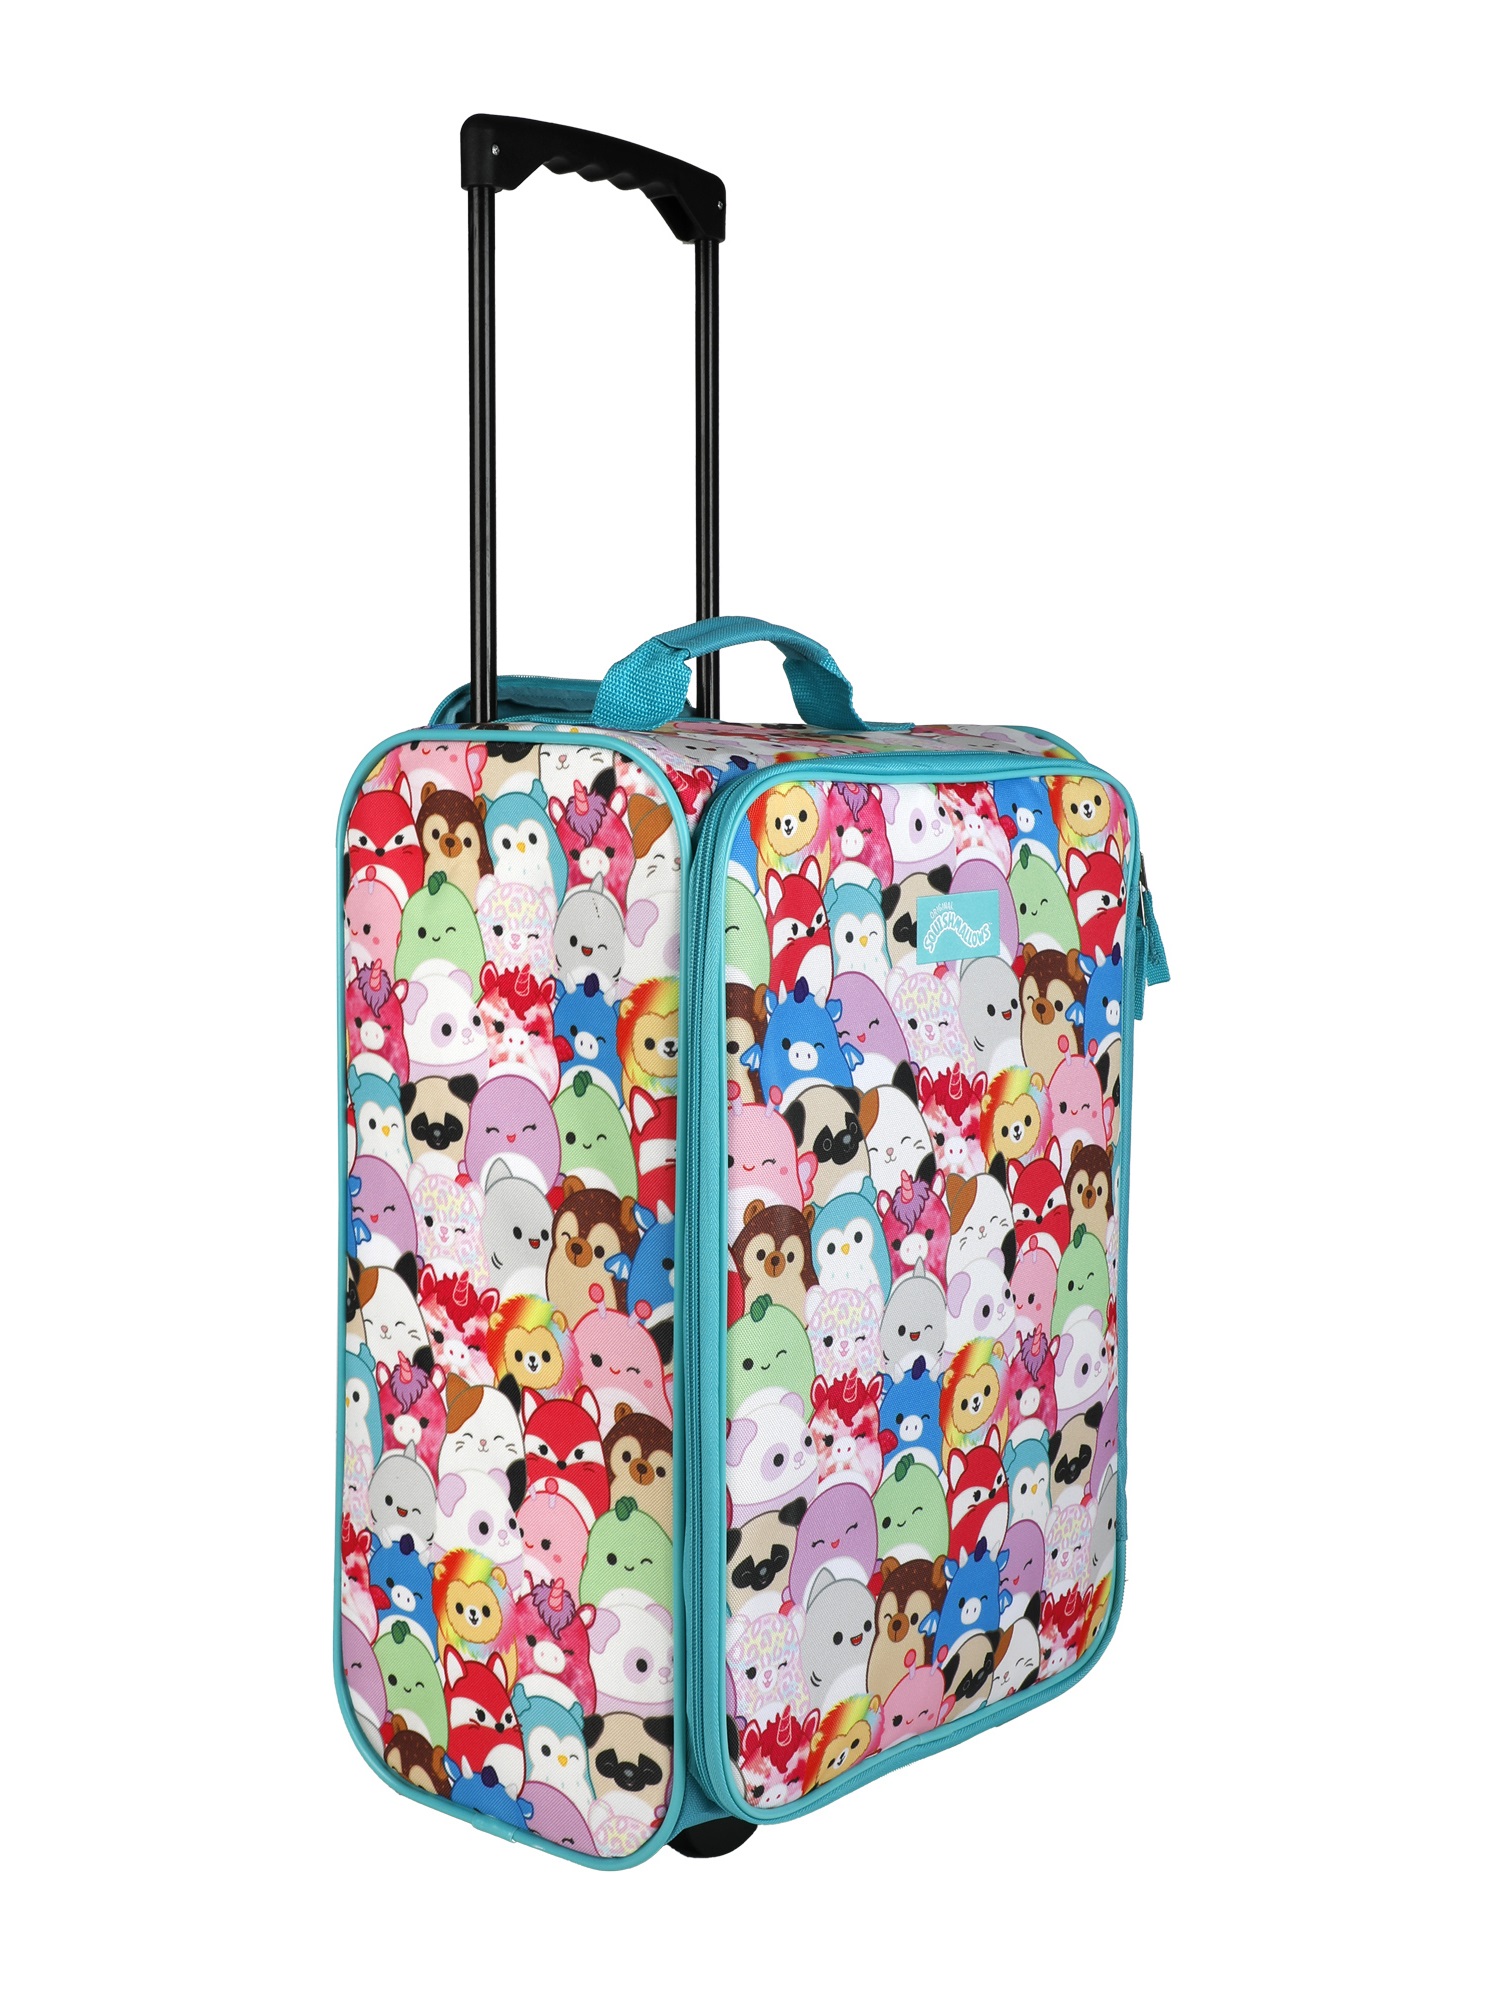 Squishmallows Cameron Cat 2pc  Travel Set with 18" Luggage and 10" Plush Backpack - image 3 of 9